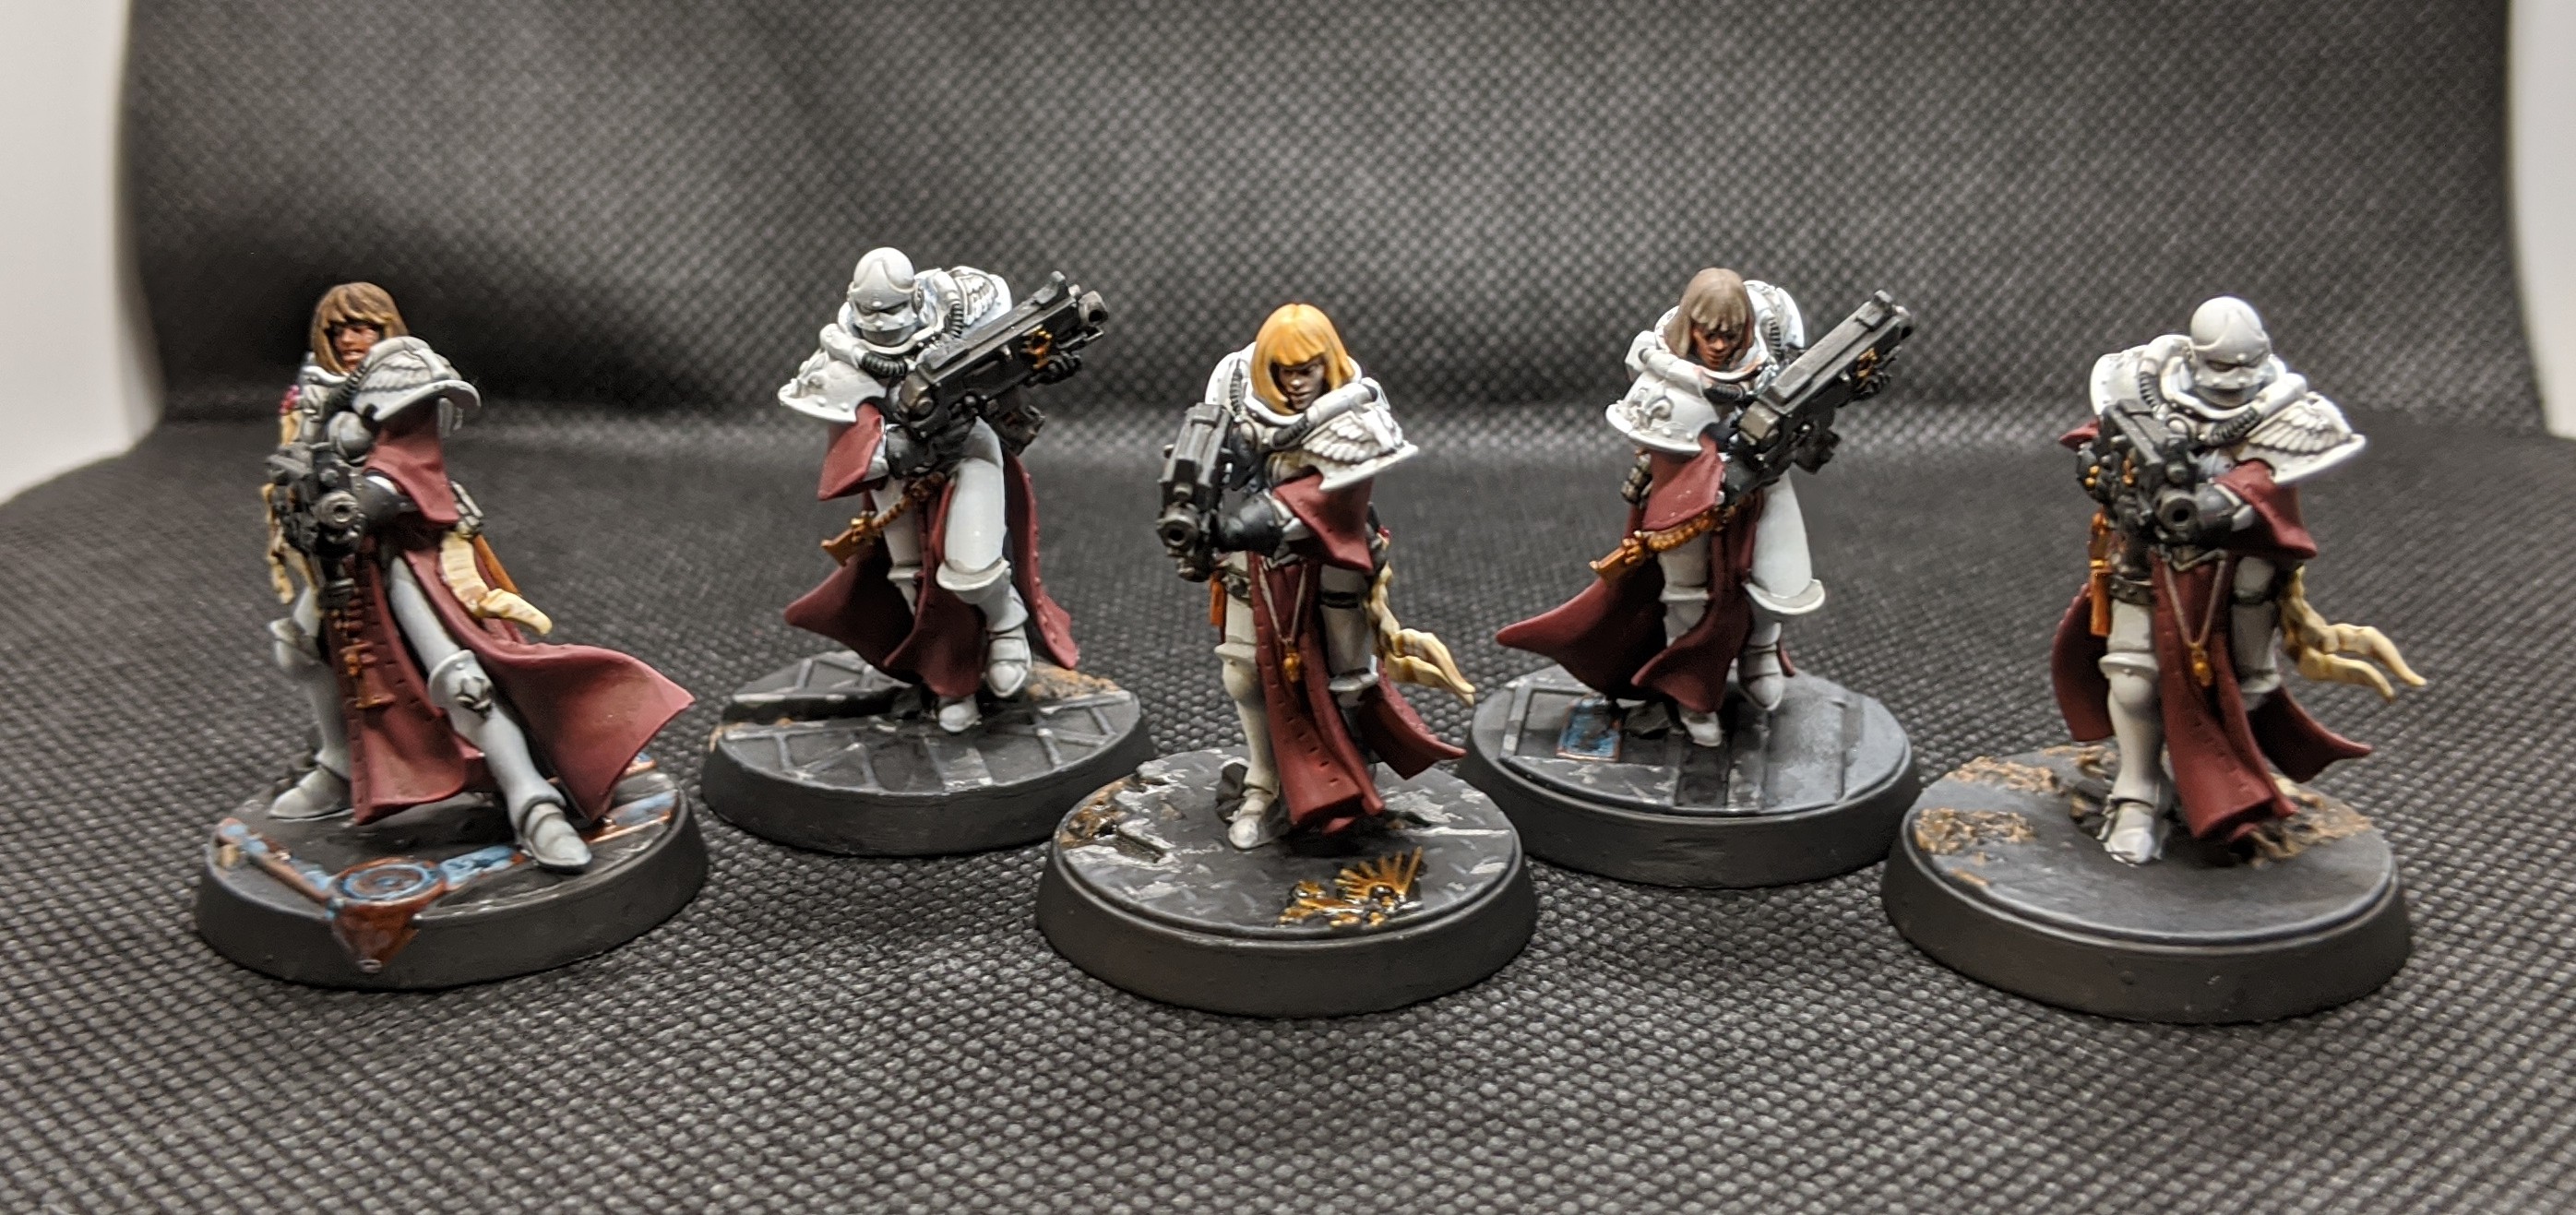 CREATE AN IMPERIAL GUARD KILL TEAM Using The Compendium Rules